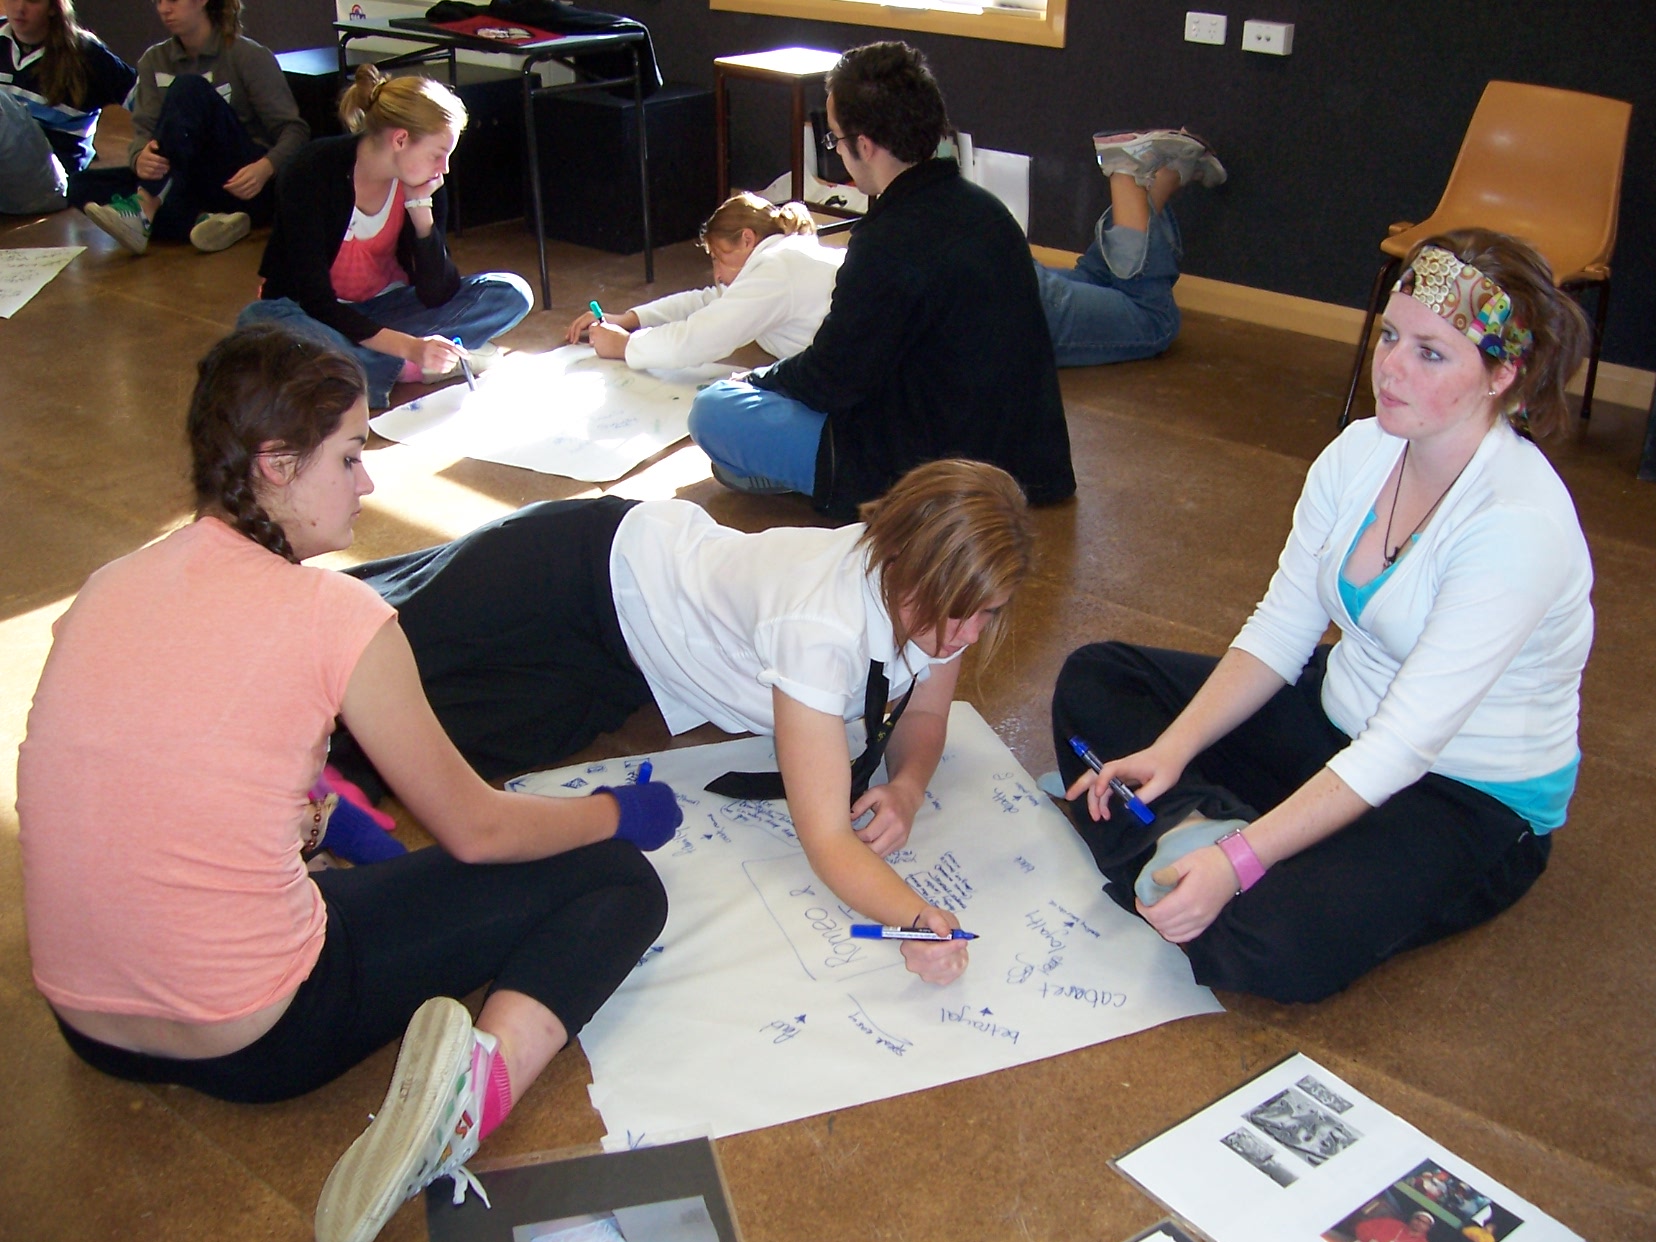 group of students sitting on floor with butchers paper creating a mind map